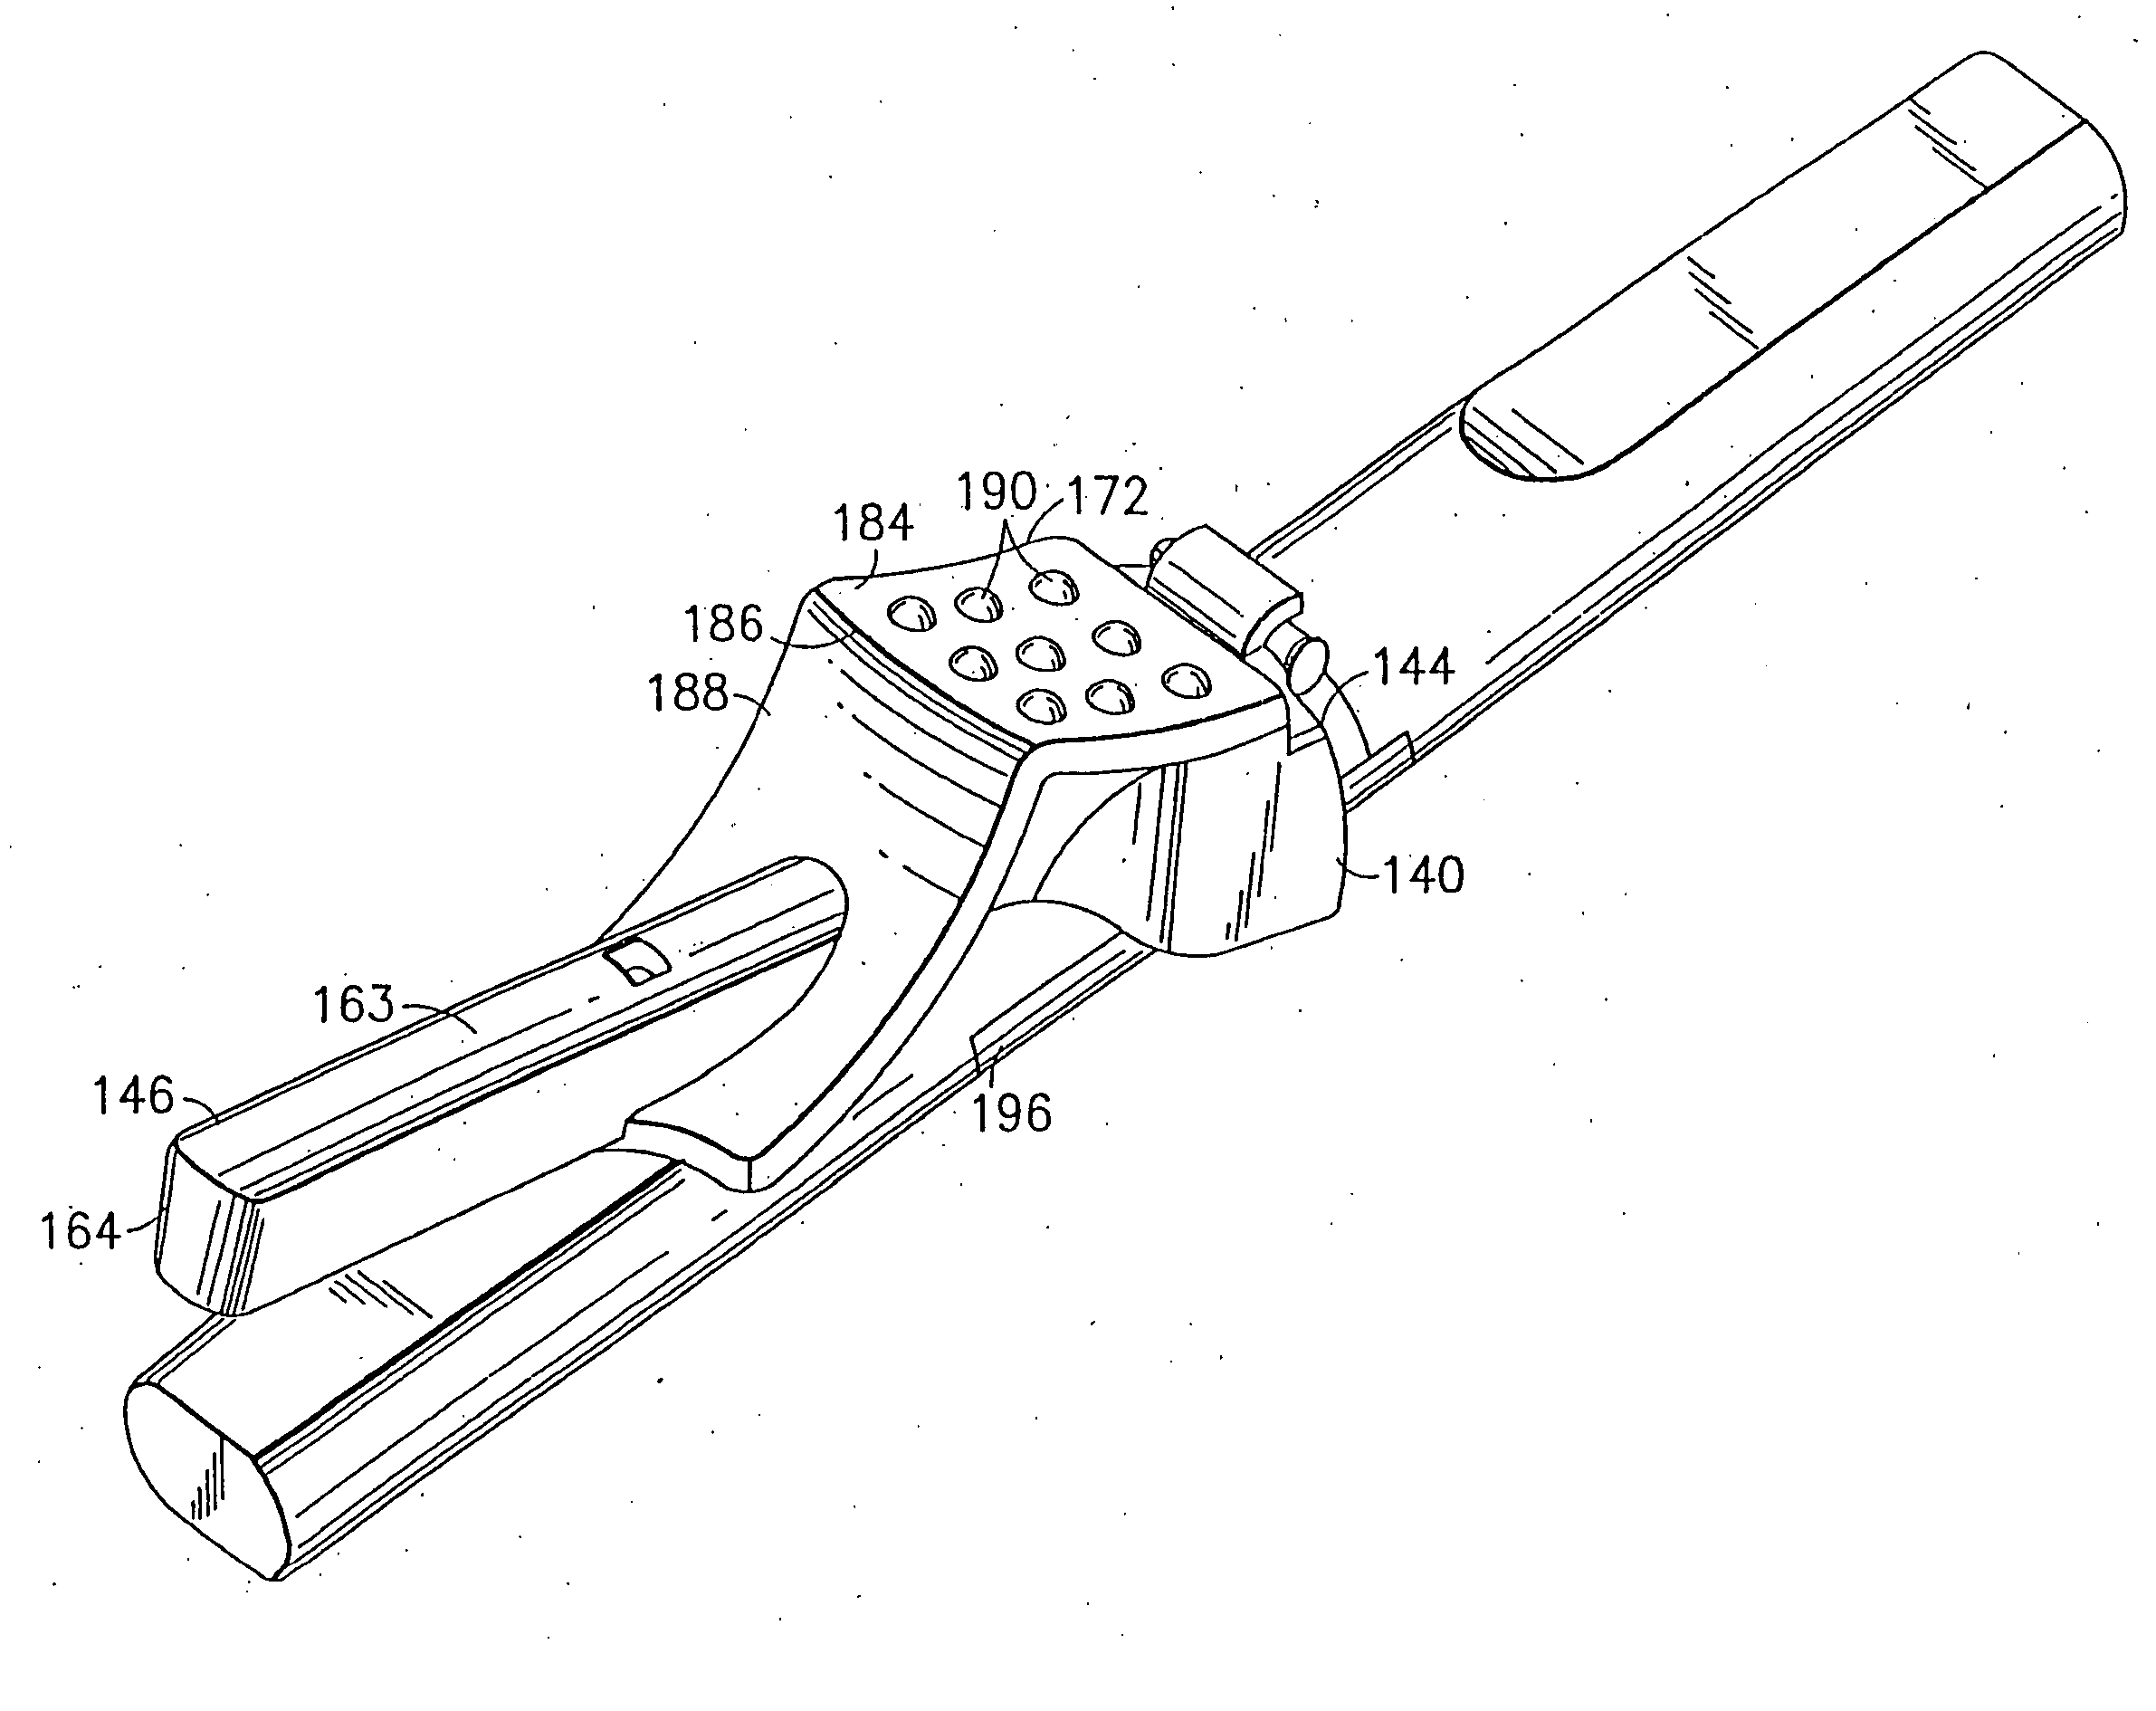 Method for making a safety shield assembly and related combinations thereof